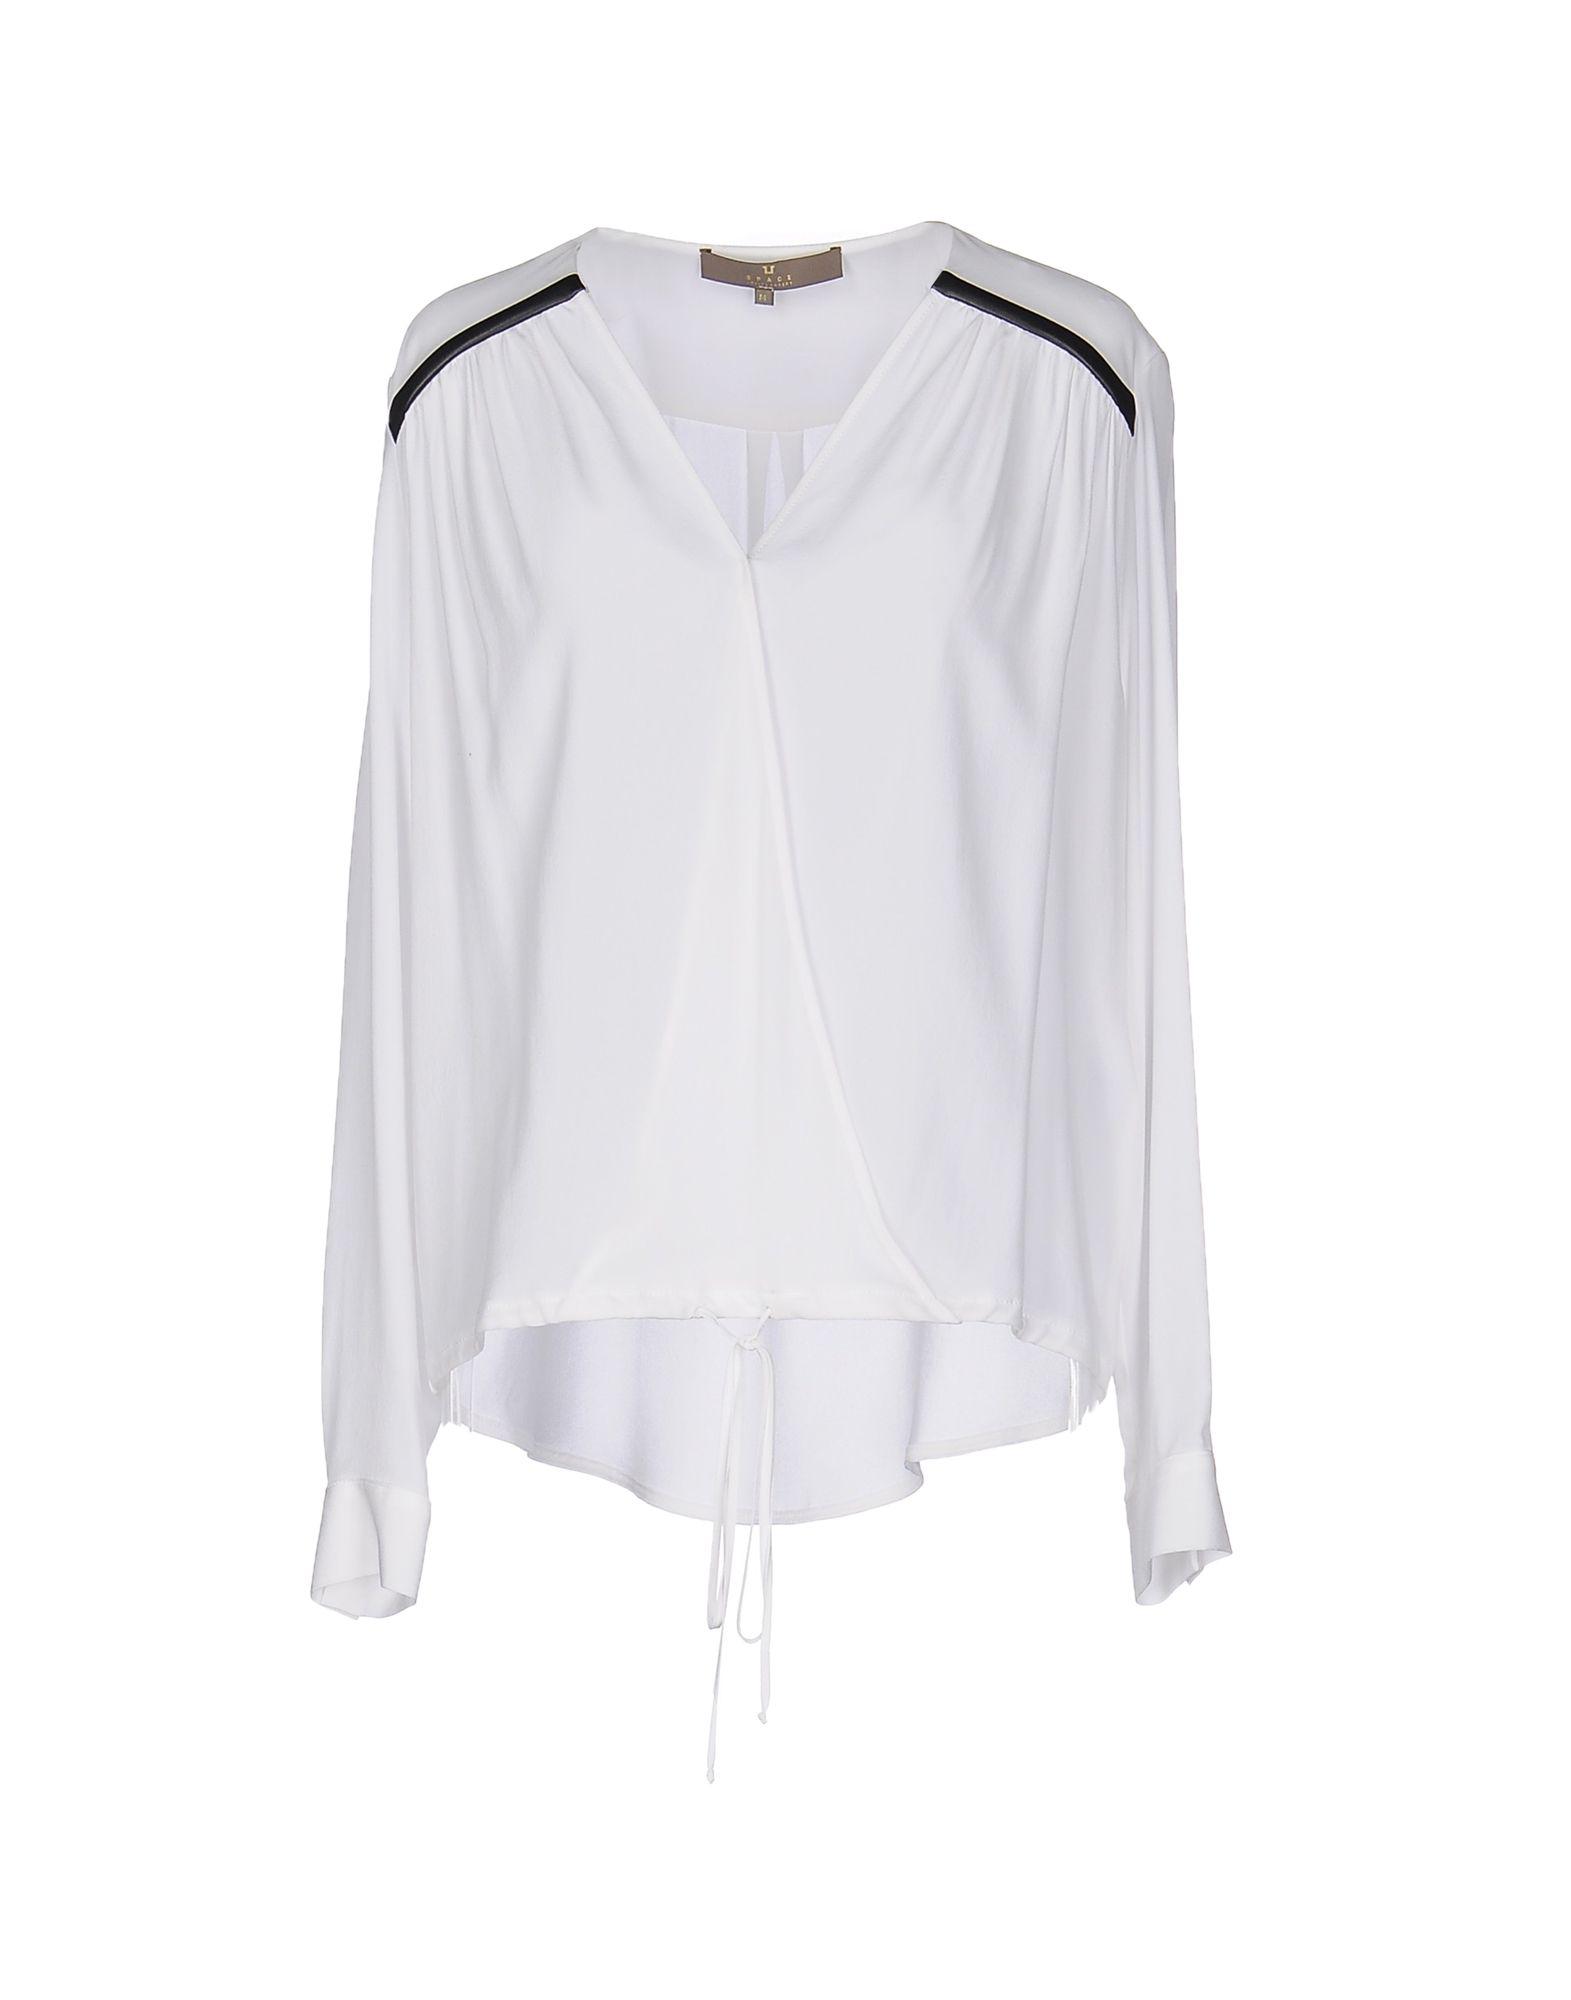 Lyst - Space Style Concept Blouse in White